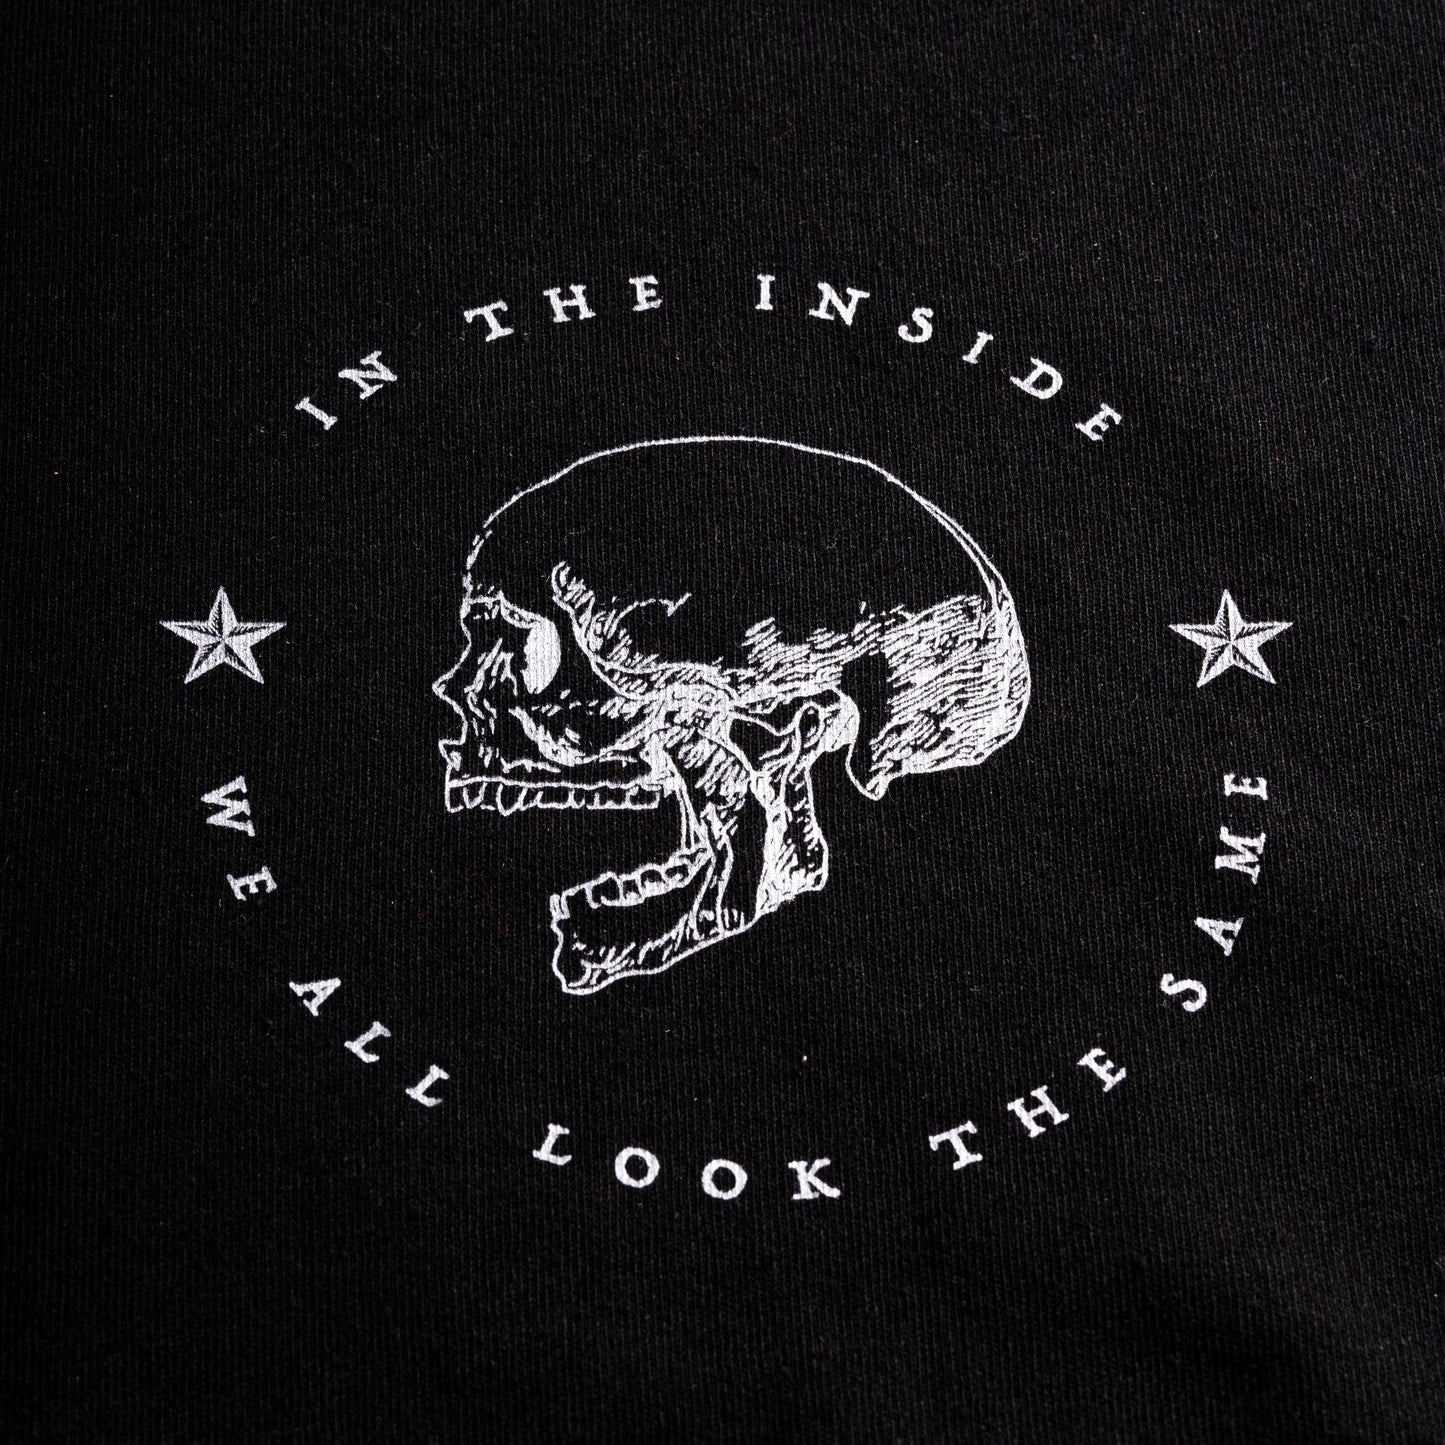 Inside We Are All the Same Men's T-Shirt